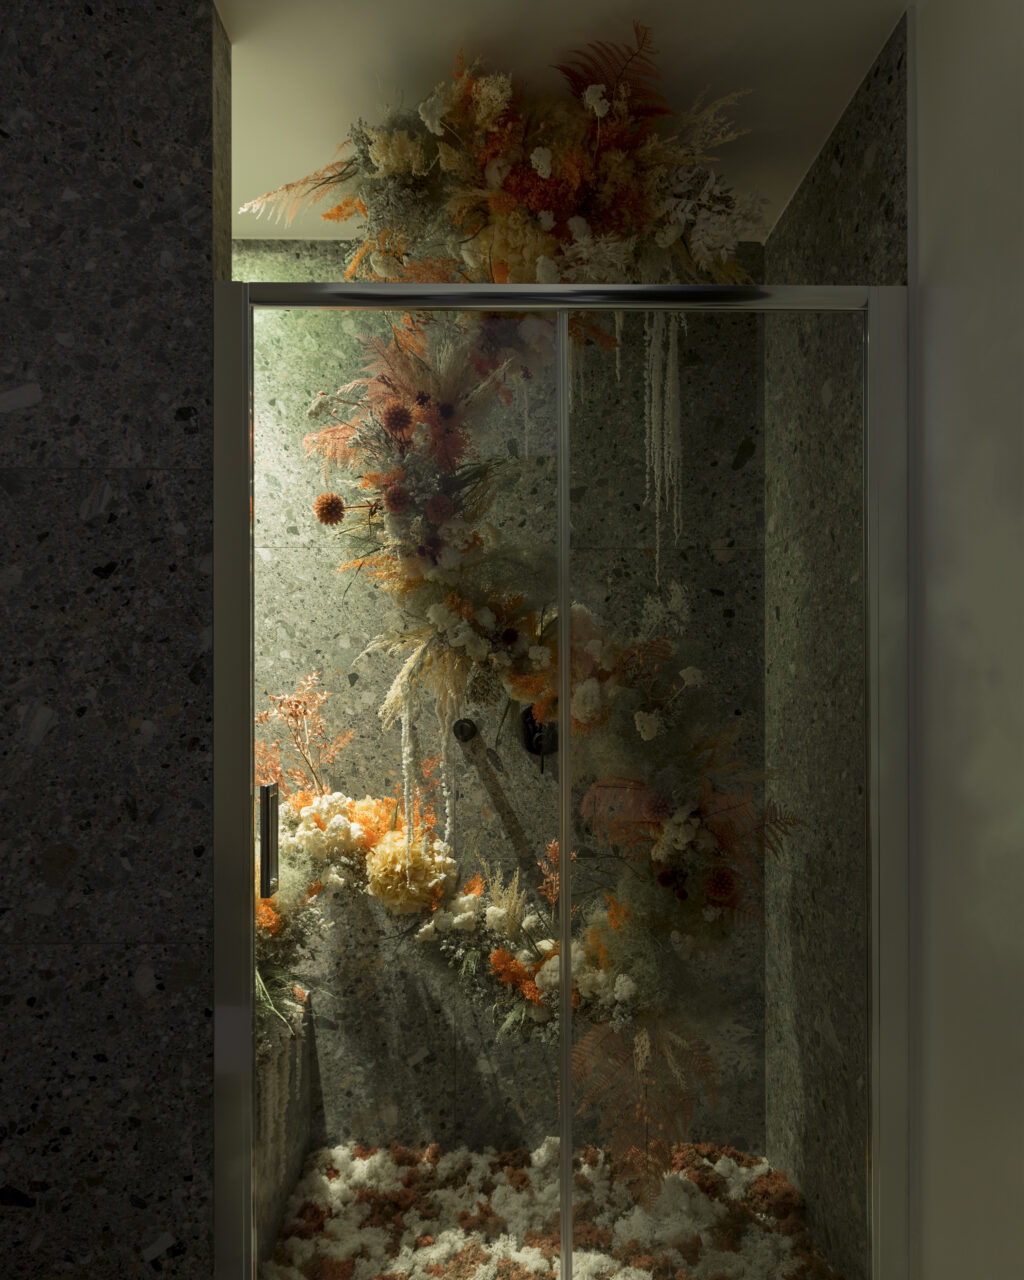 A floral installation in a bathroom shower stall